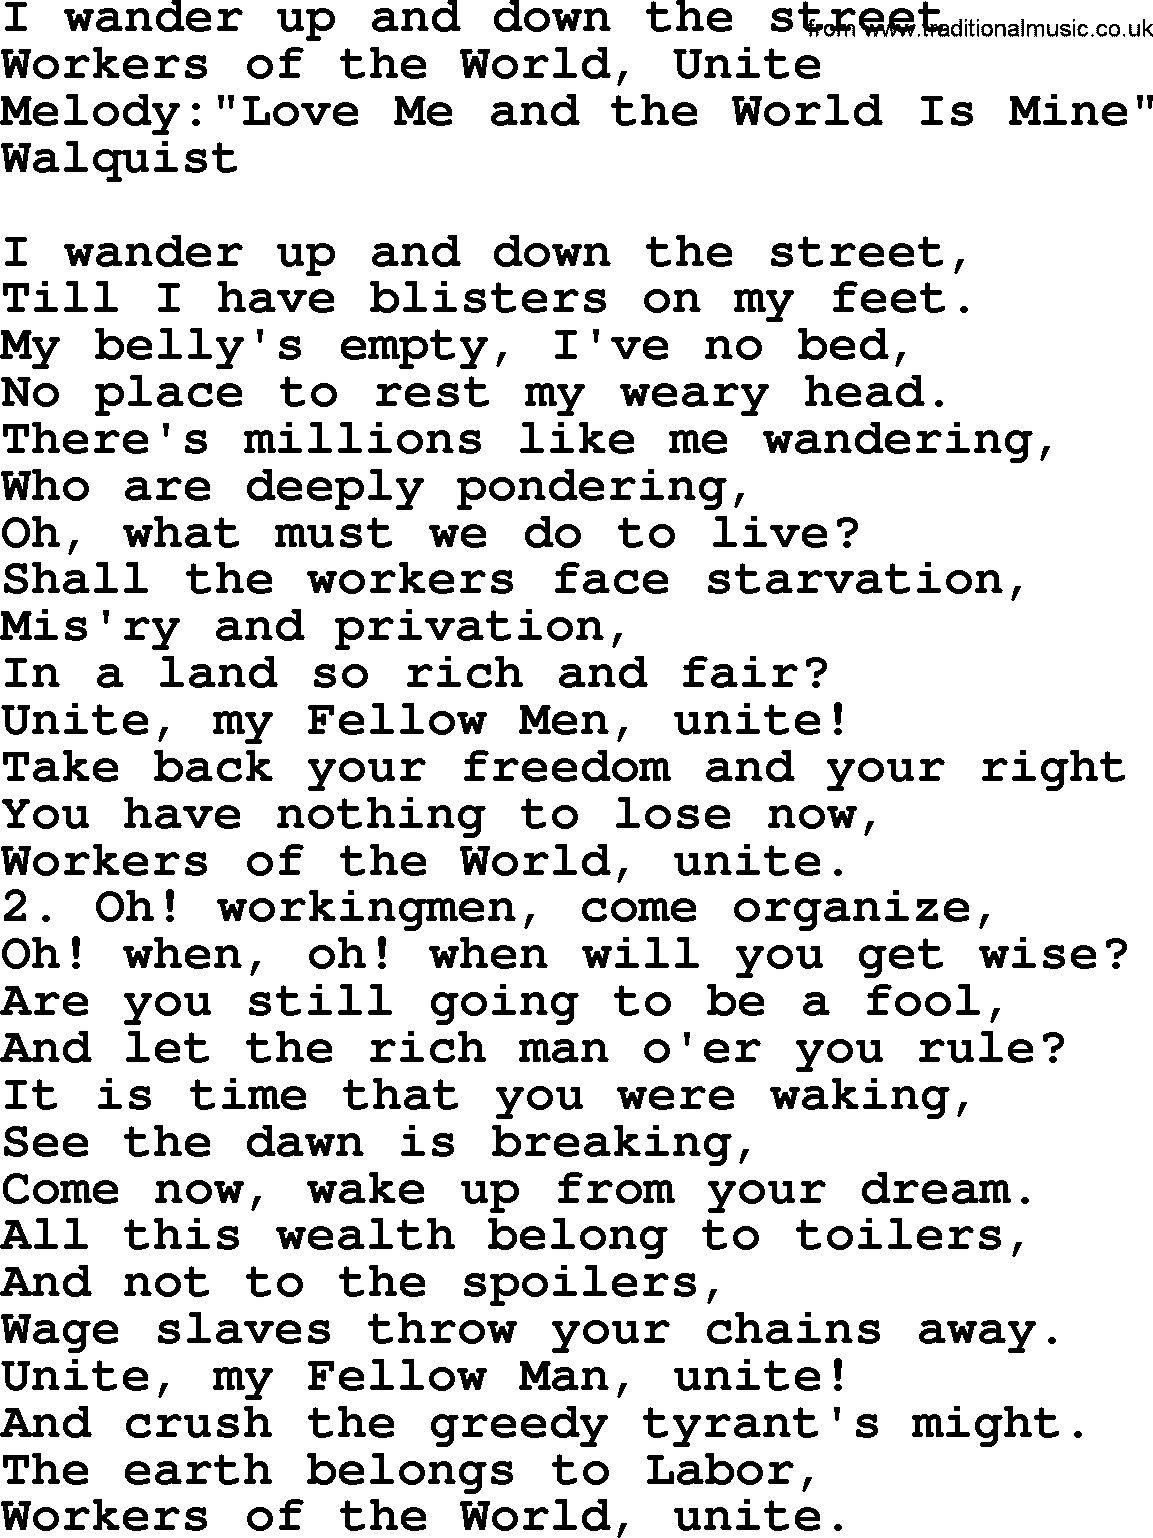 Political, Solidarity, Workers or Union song: I Wander Up And Down The Street, lyrics